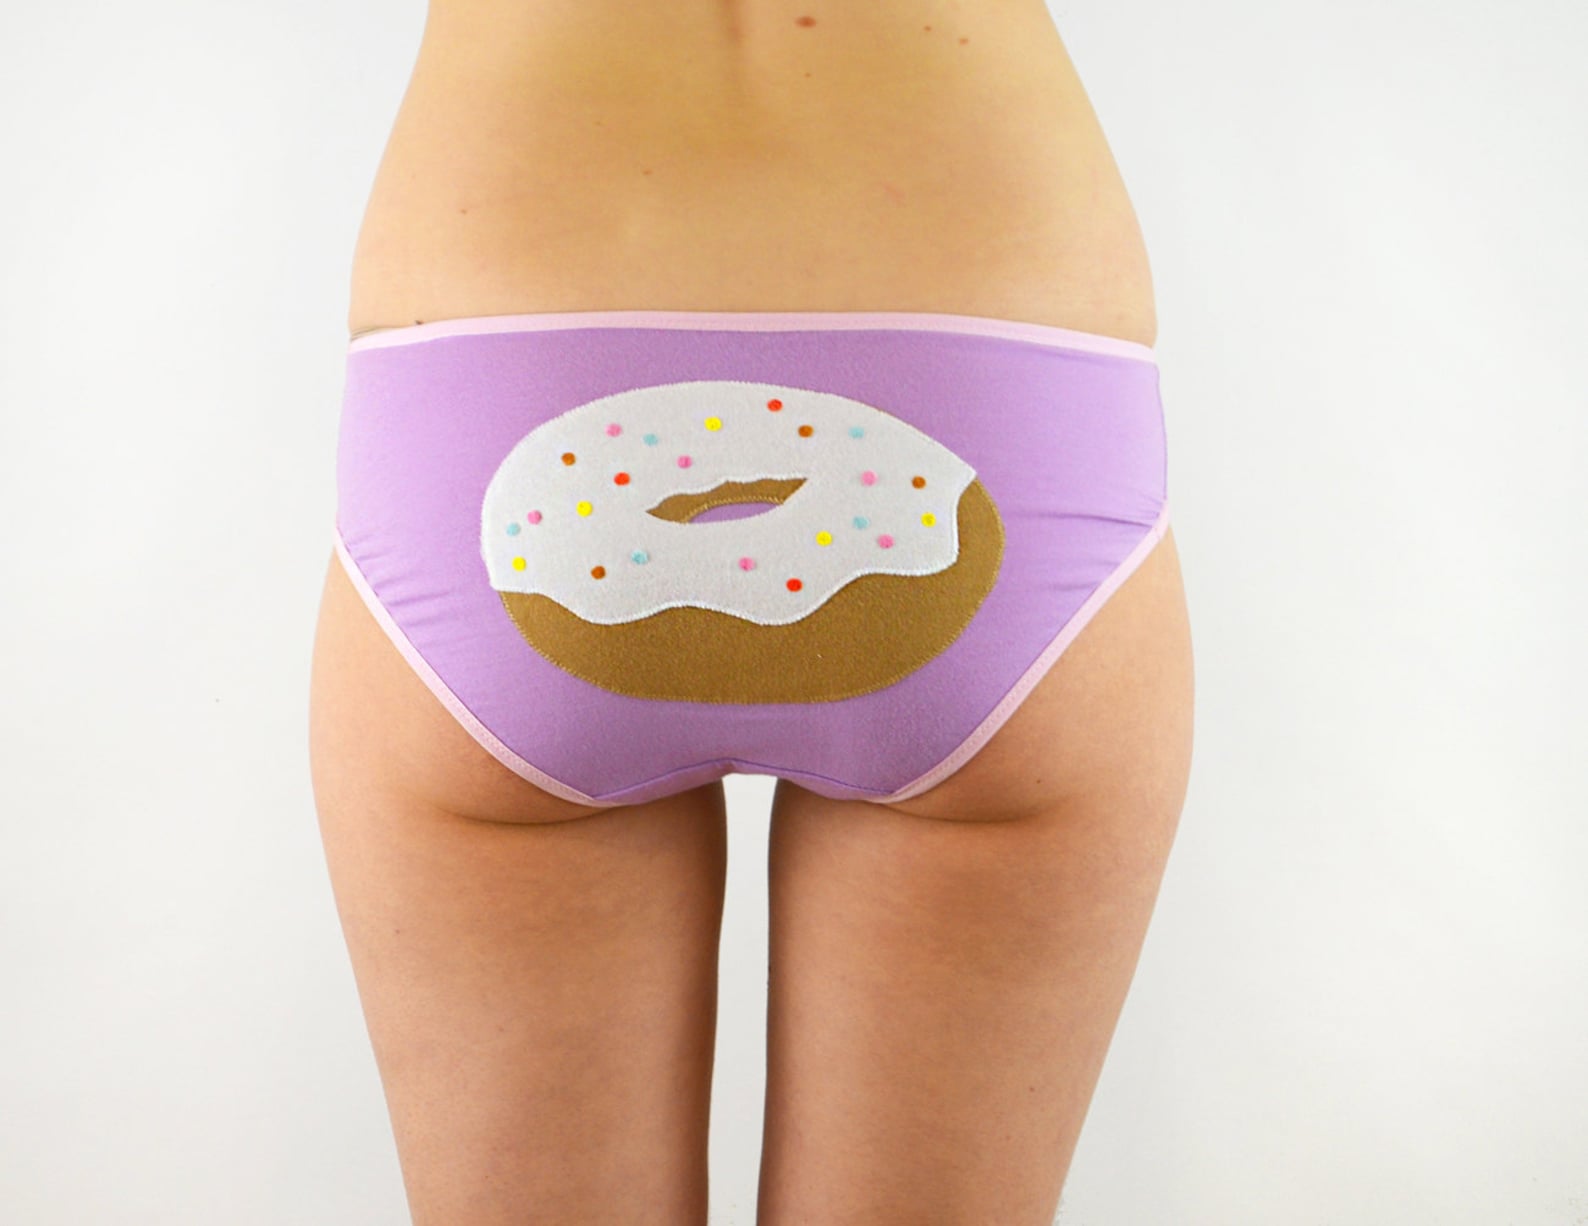 Lilac panties with donut butt lingerie underwear image 1.